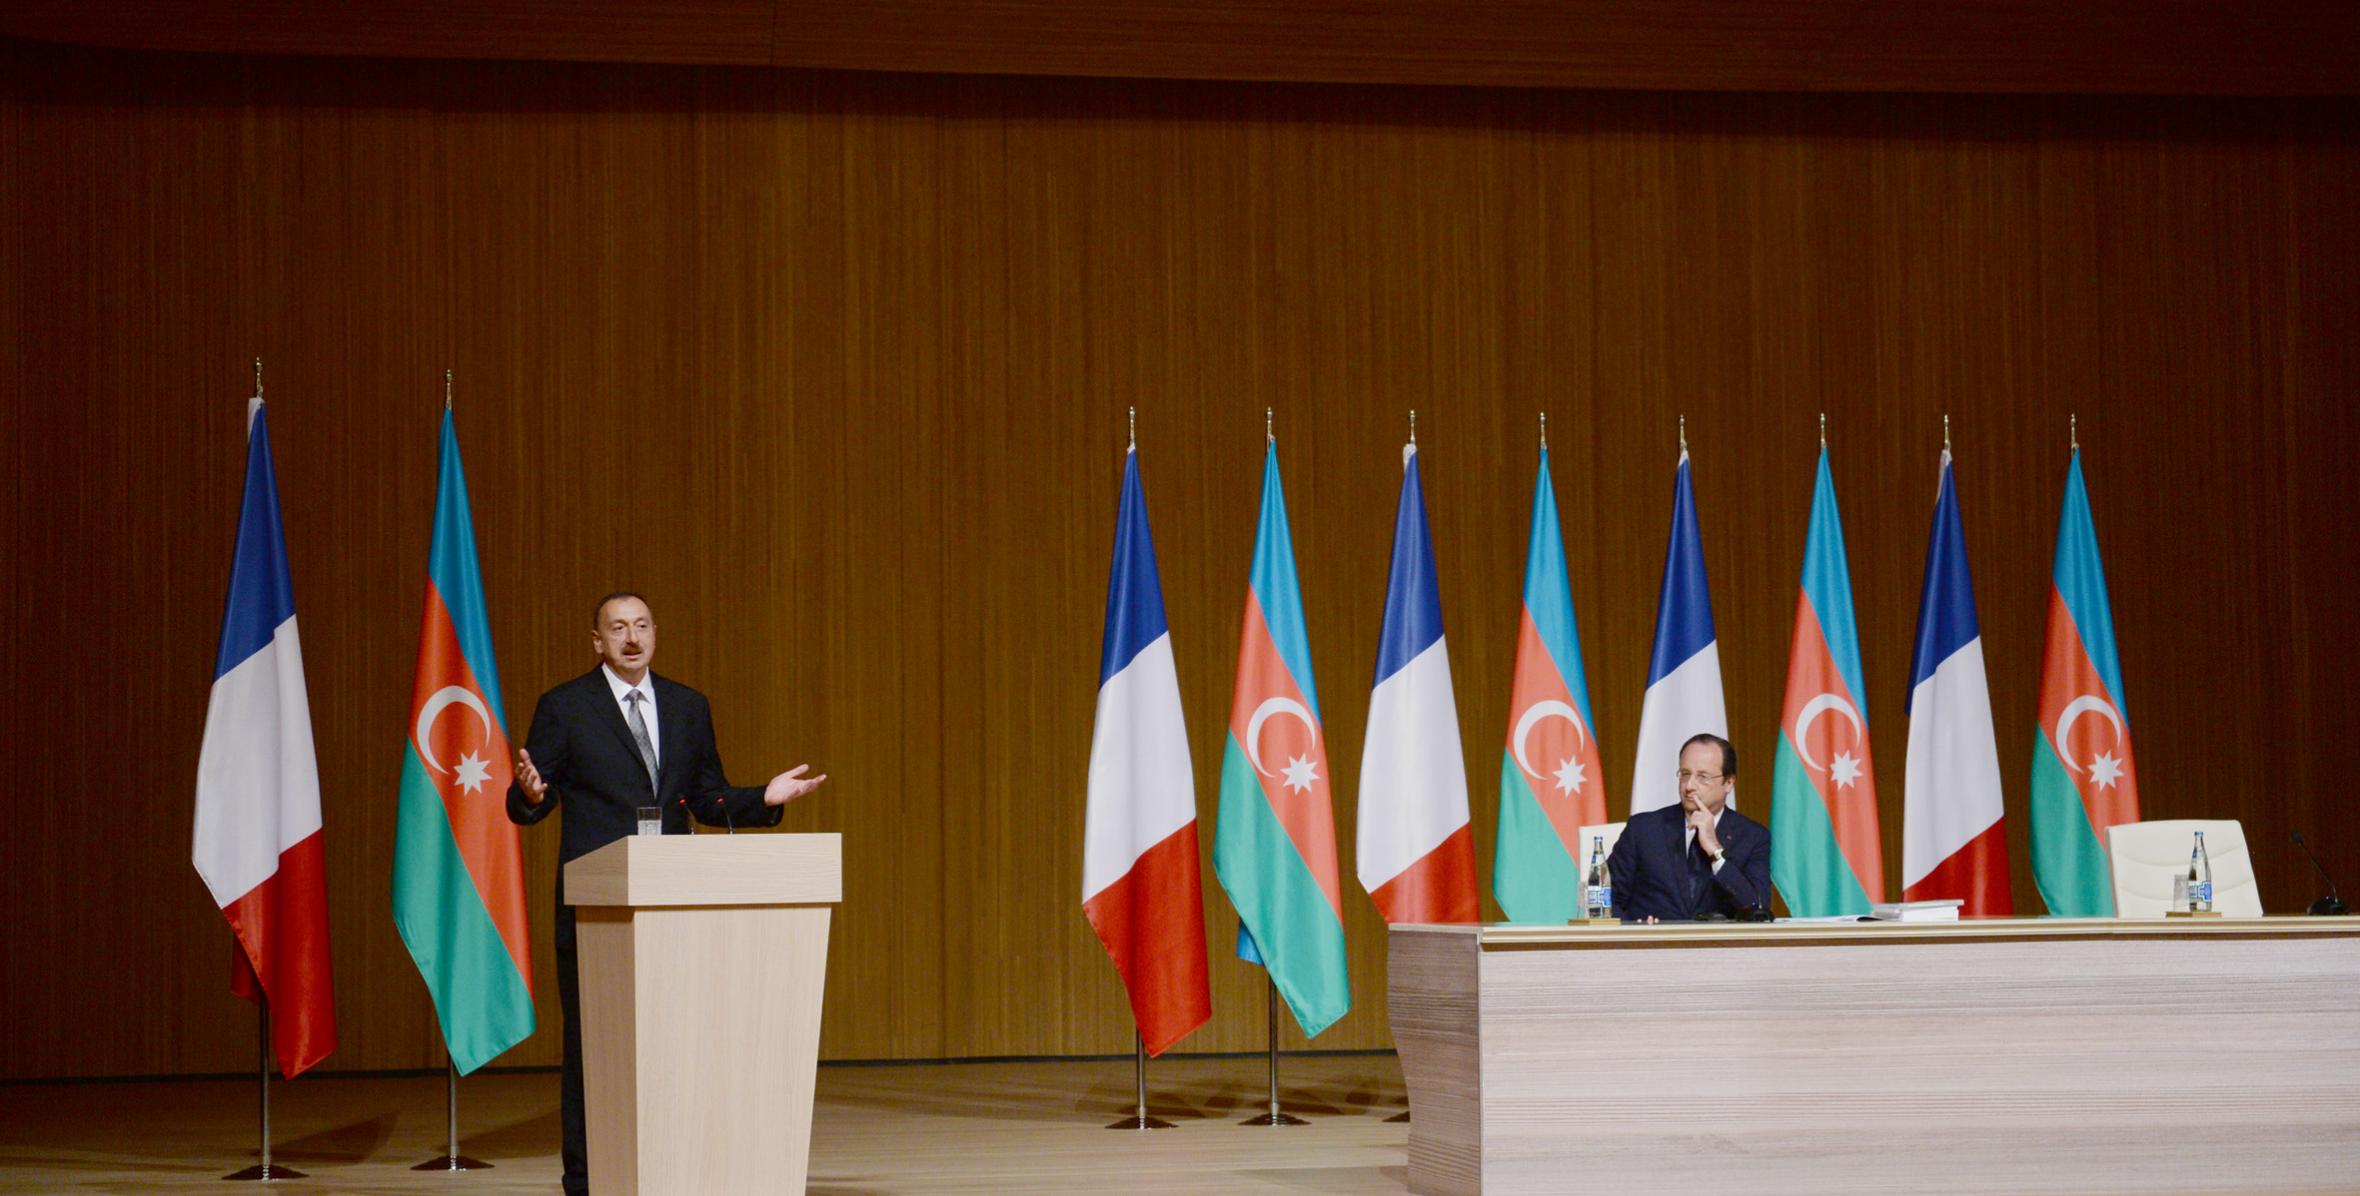 Ilham Aliyev and French President Francois Hollande took part in the Azerbaijani-French business forum